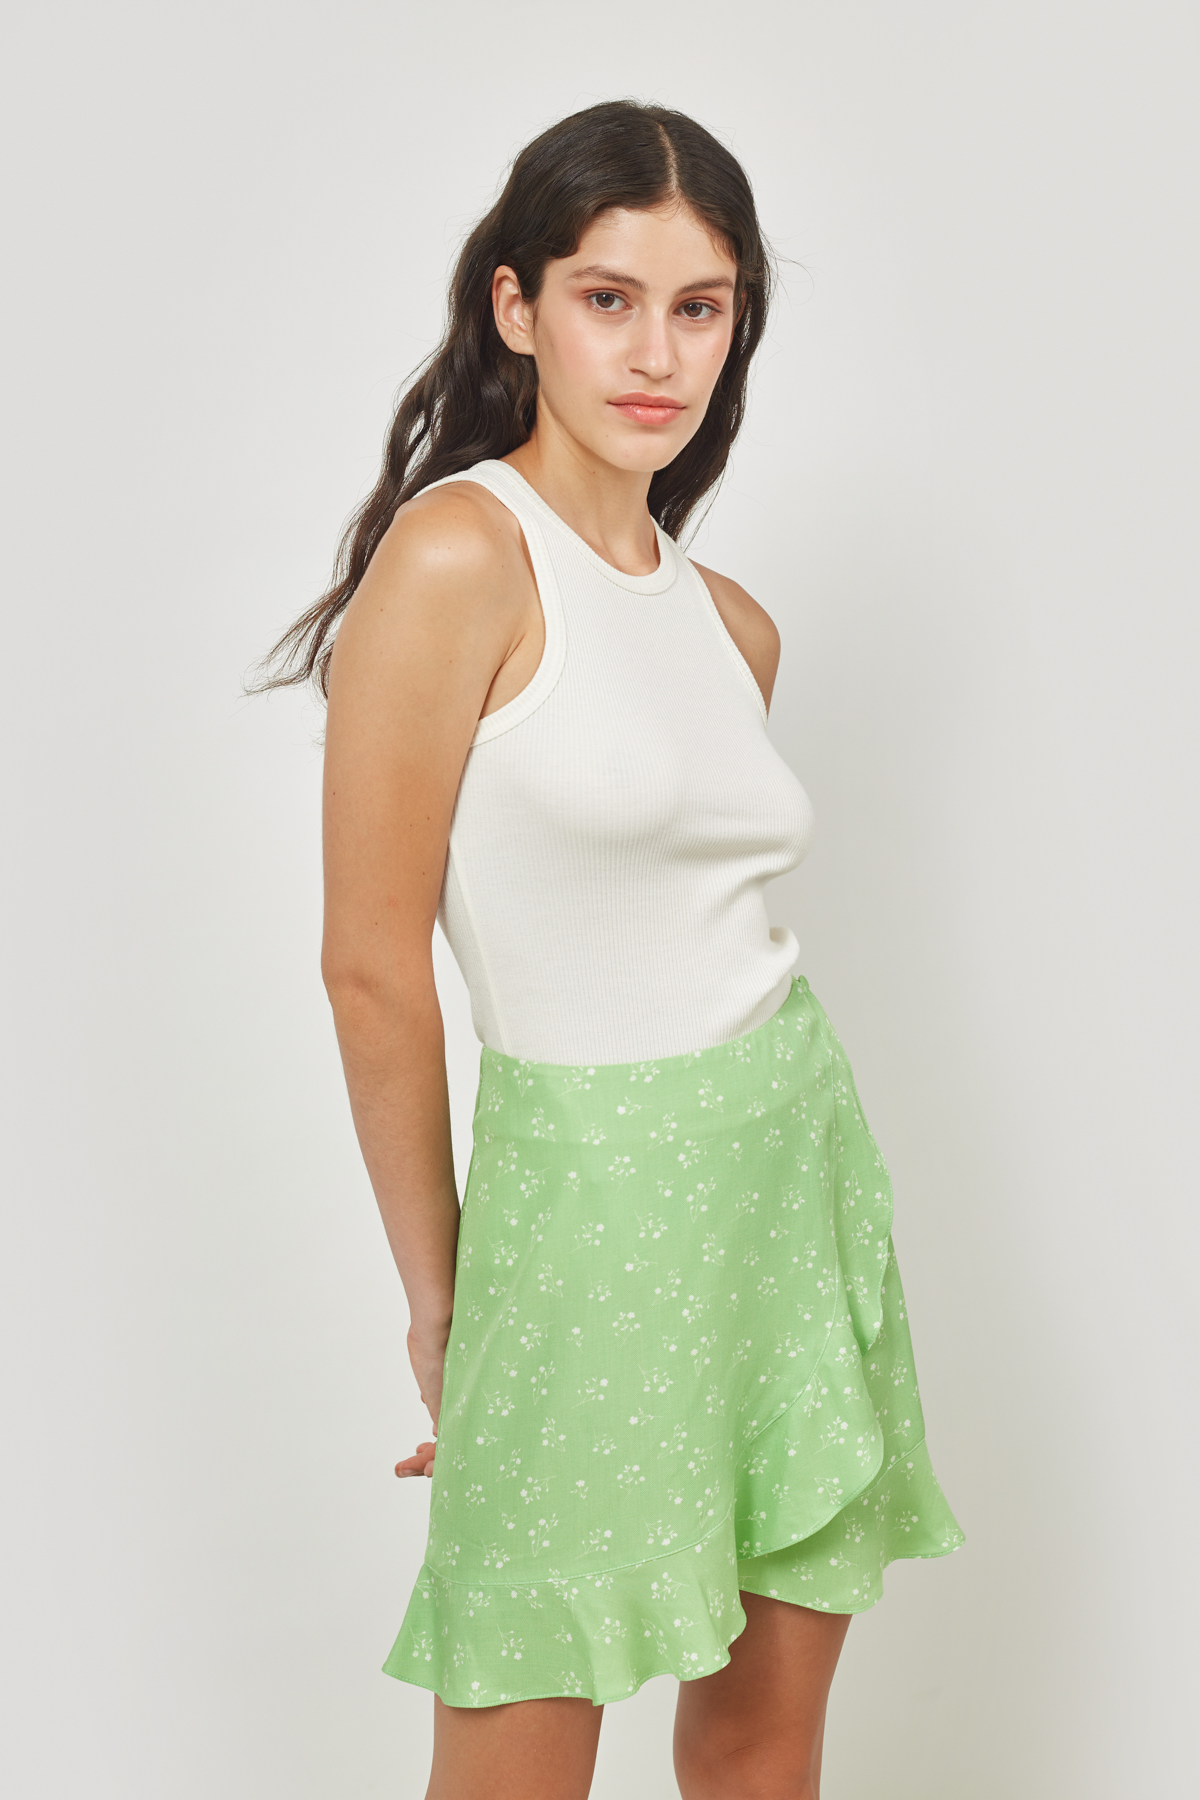 Short skirt in mint viscose in floral print, photo 1